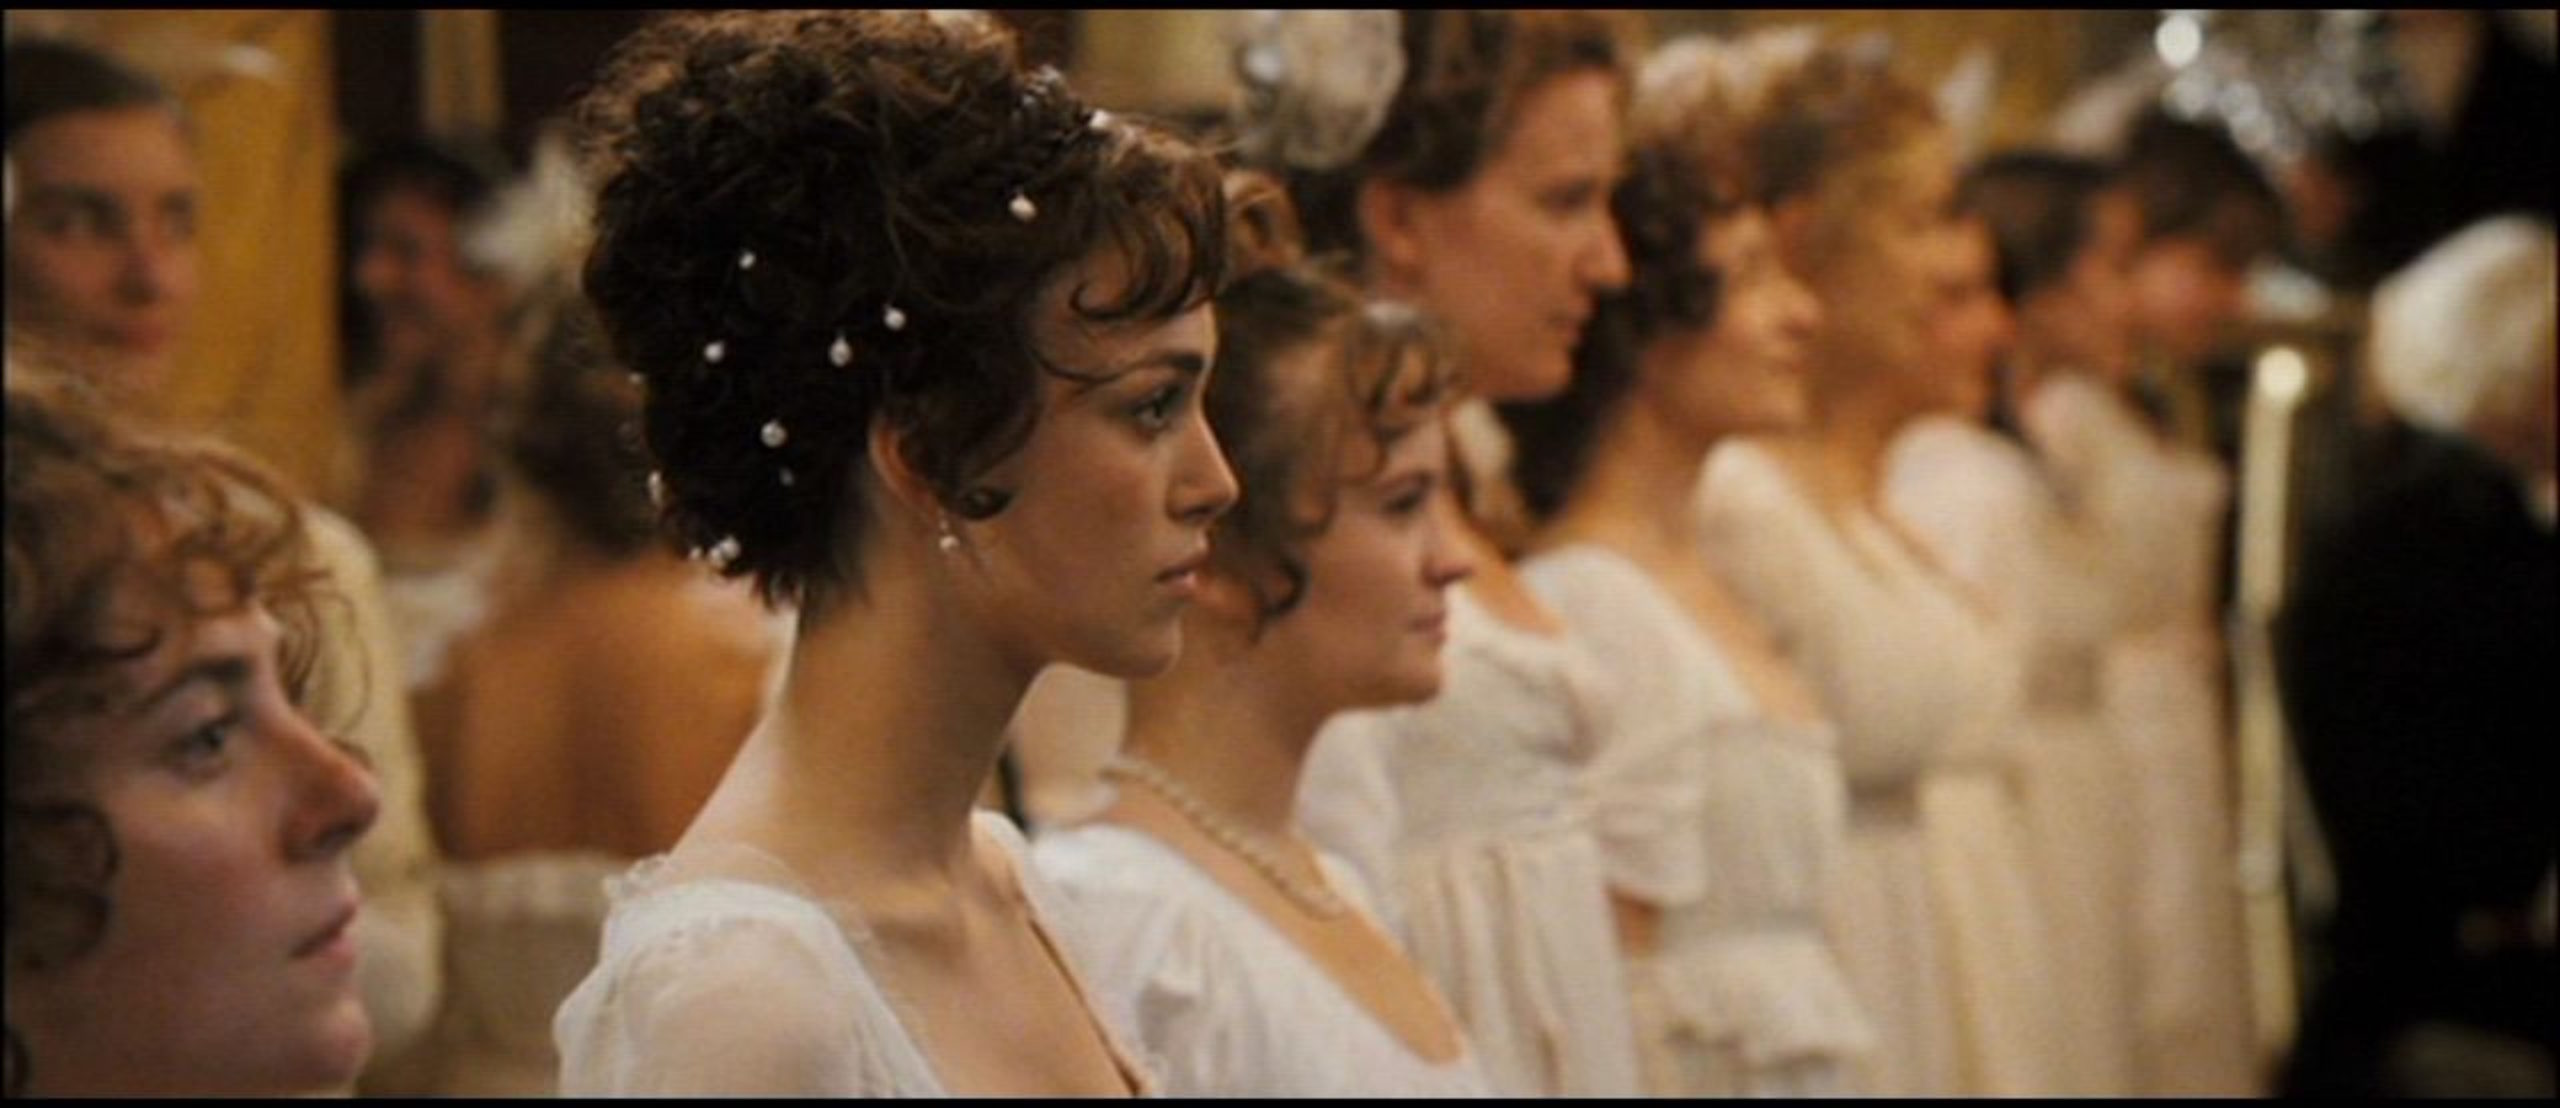 Elizabeth standing among a row of ladies during the dance with Mr. Darcy at the Netherfield Ball. 